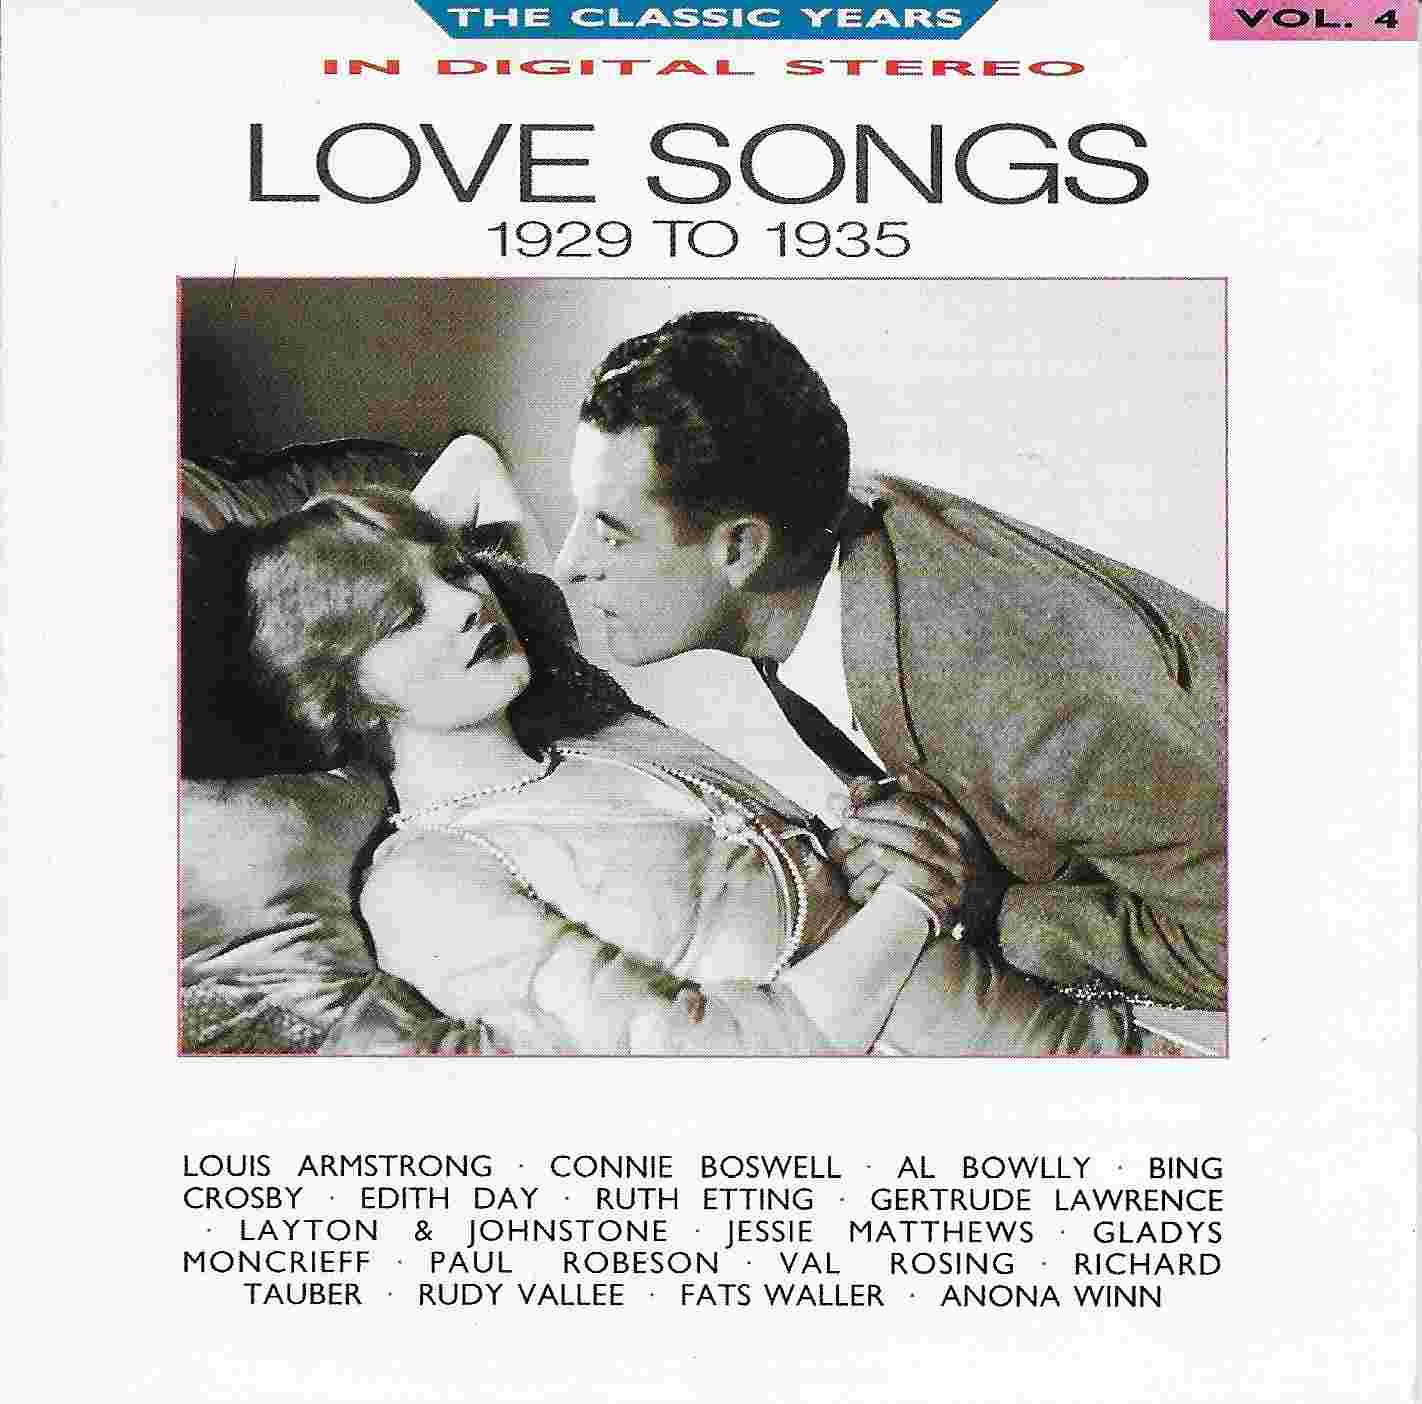 Picture of BBCCD651 Classic years - Volume 4, Love songs by artist Various from the BBC cds - Records and Tapes library